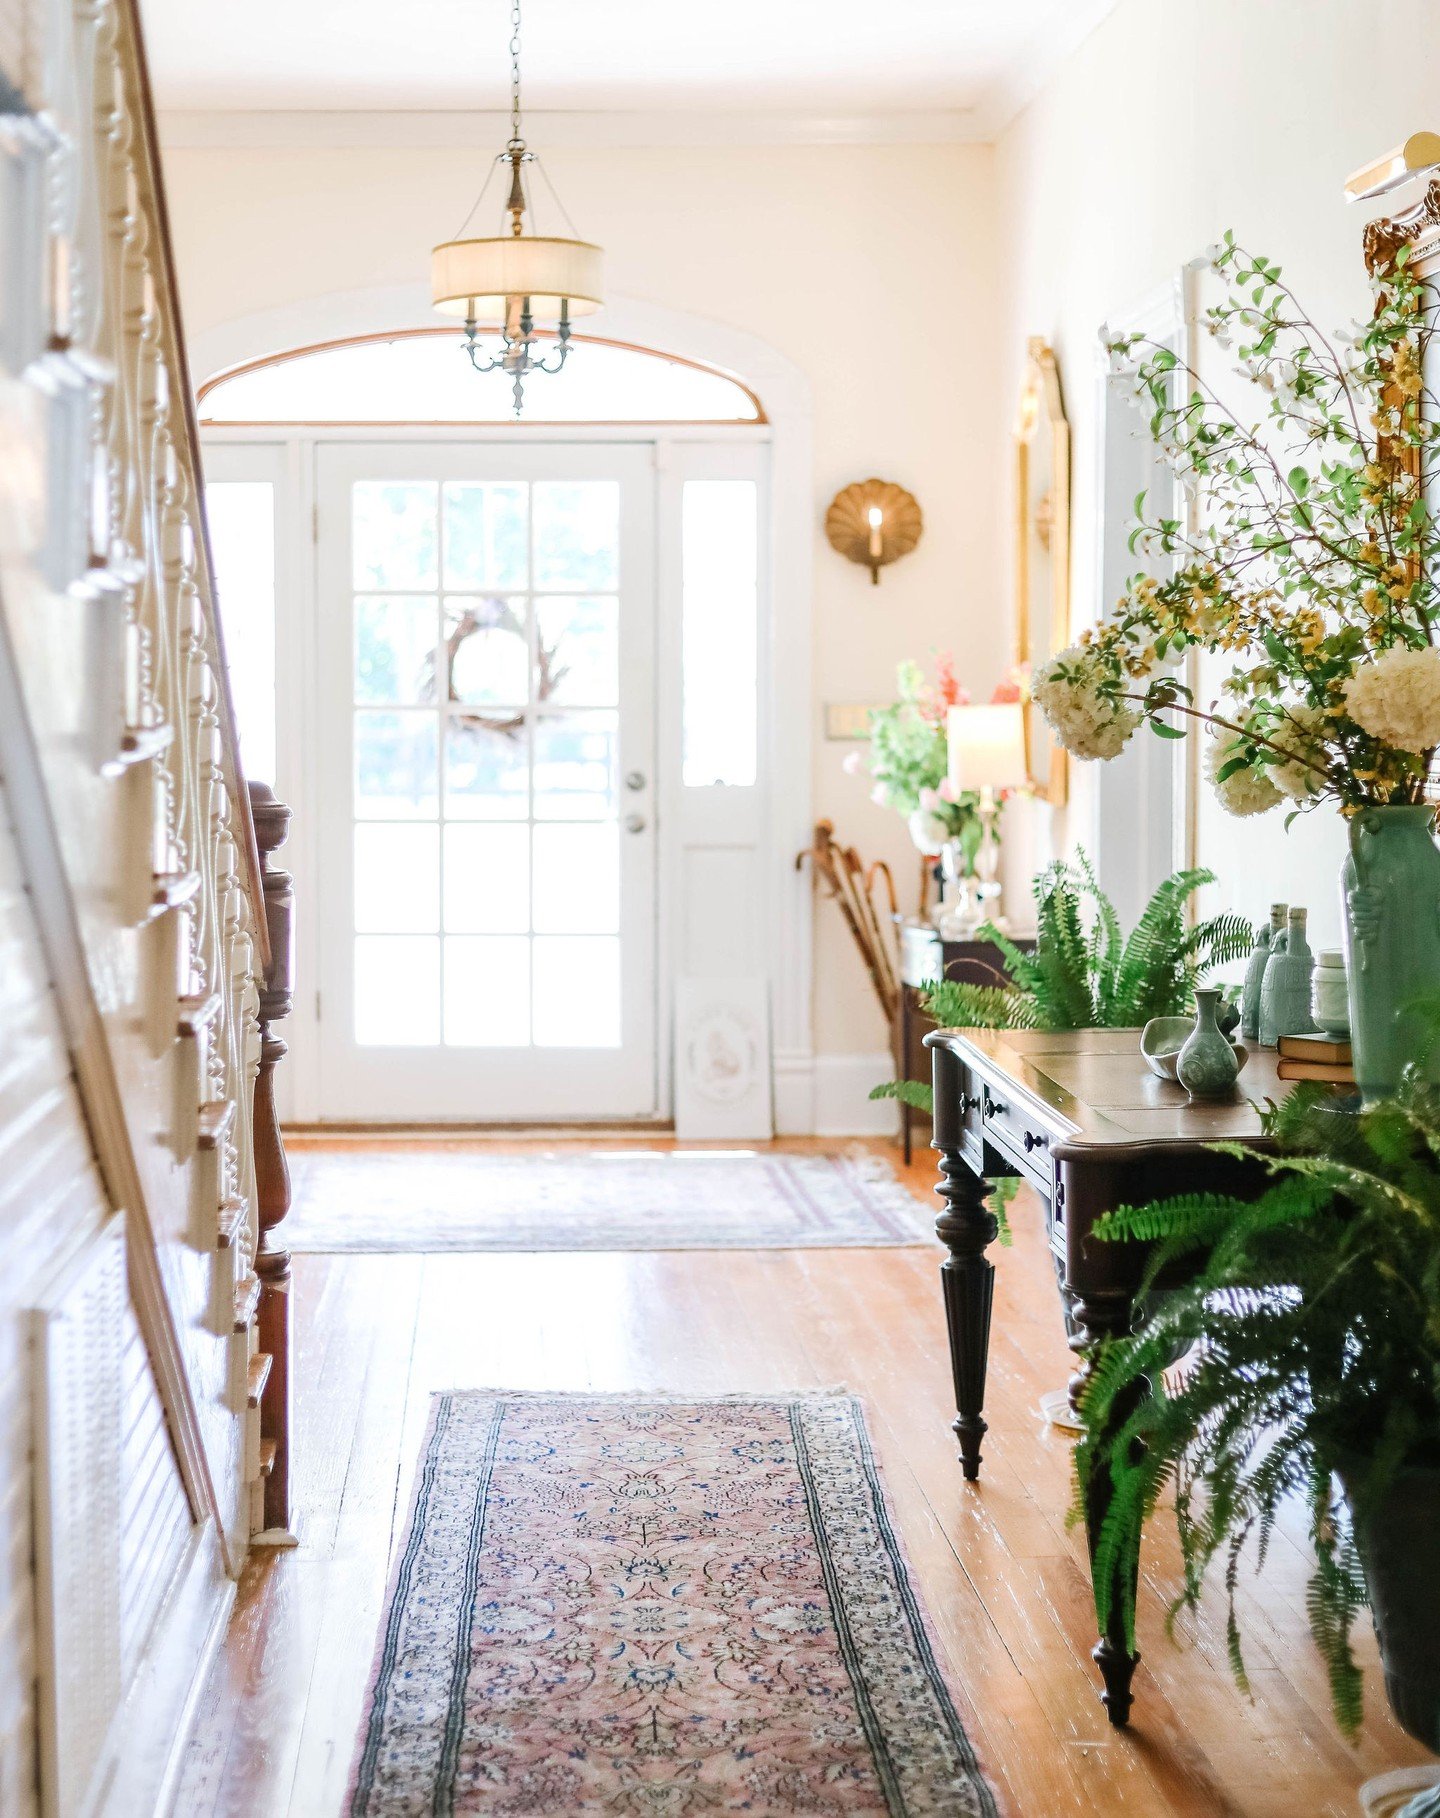 A Grand Entrance. Did you get a chance to see the Edgewood Farmhouse on the Tour of Homes? Comment below on what your favorite room was! We would love to hear from you! 📸@meetmeonmccaskill #lazyfoxlavenderfarm #1910farmhouse #historiccameronnc #came